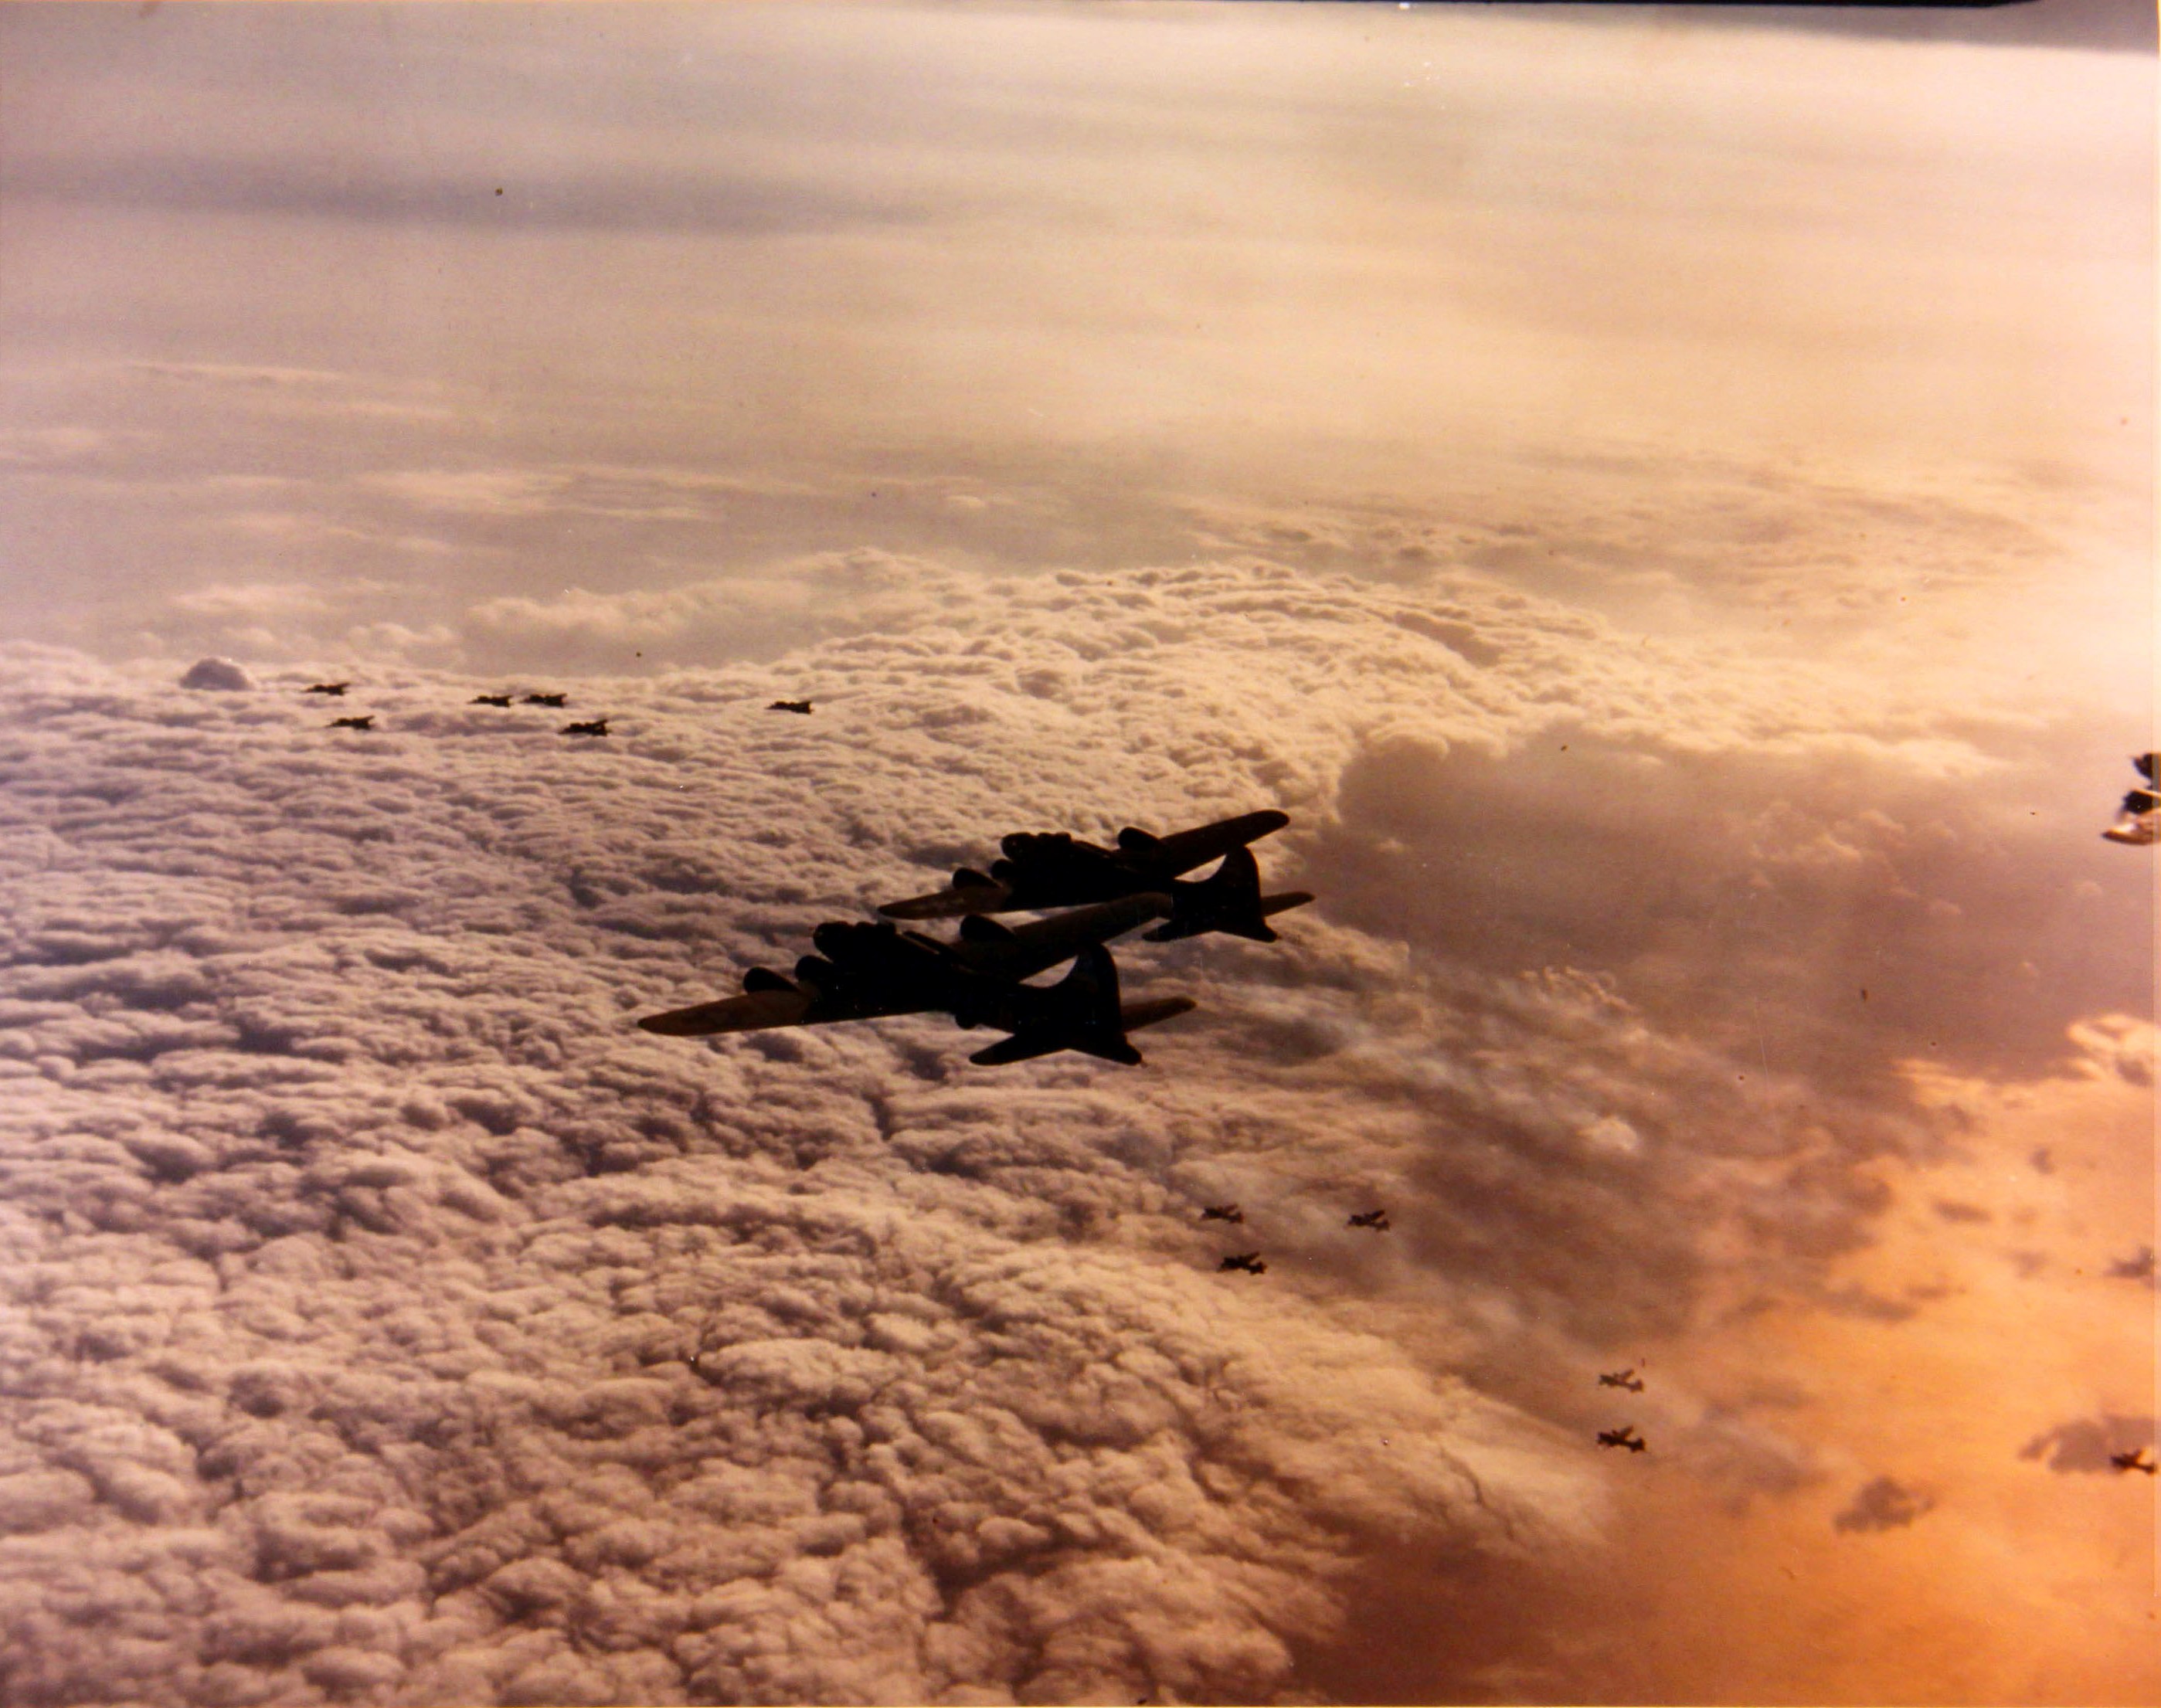 B-17 Fortresses of the 91st Bomb Group nearing the Dornier Assembly Plant at Meulan, France at dawn, 31 Aug 1943.